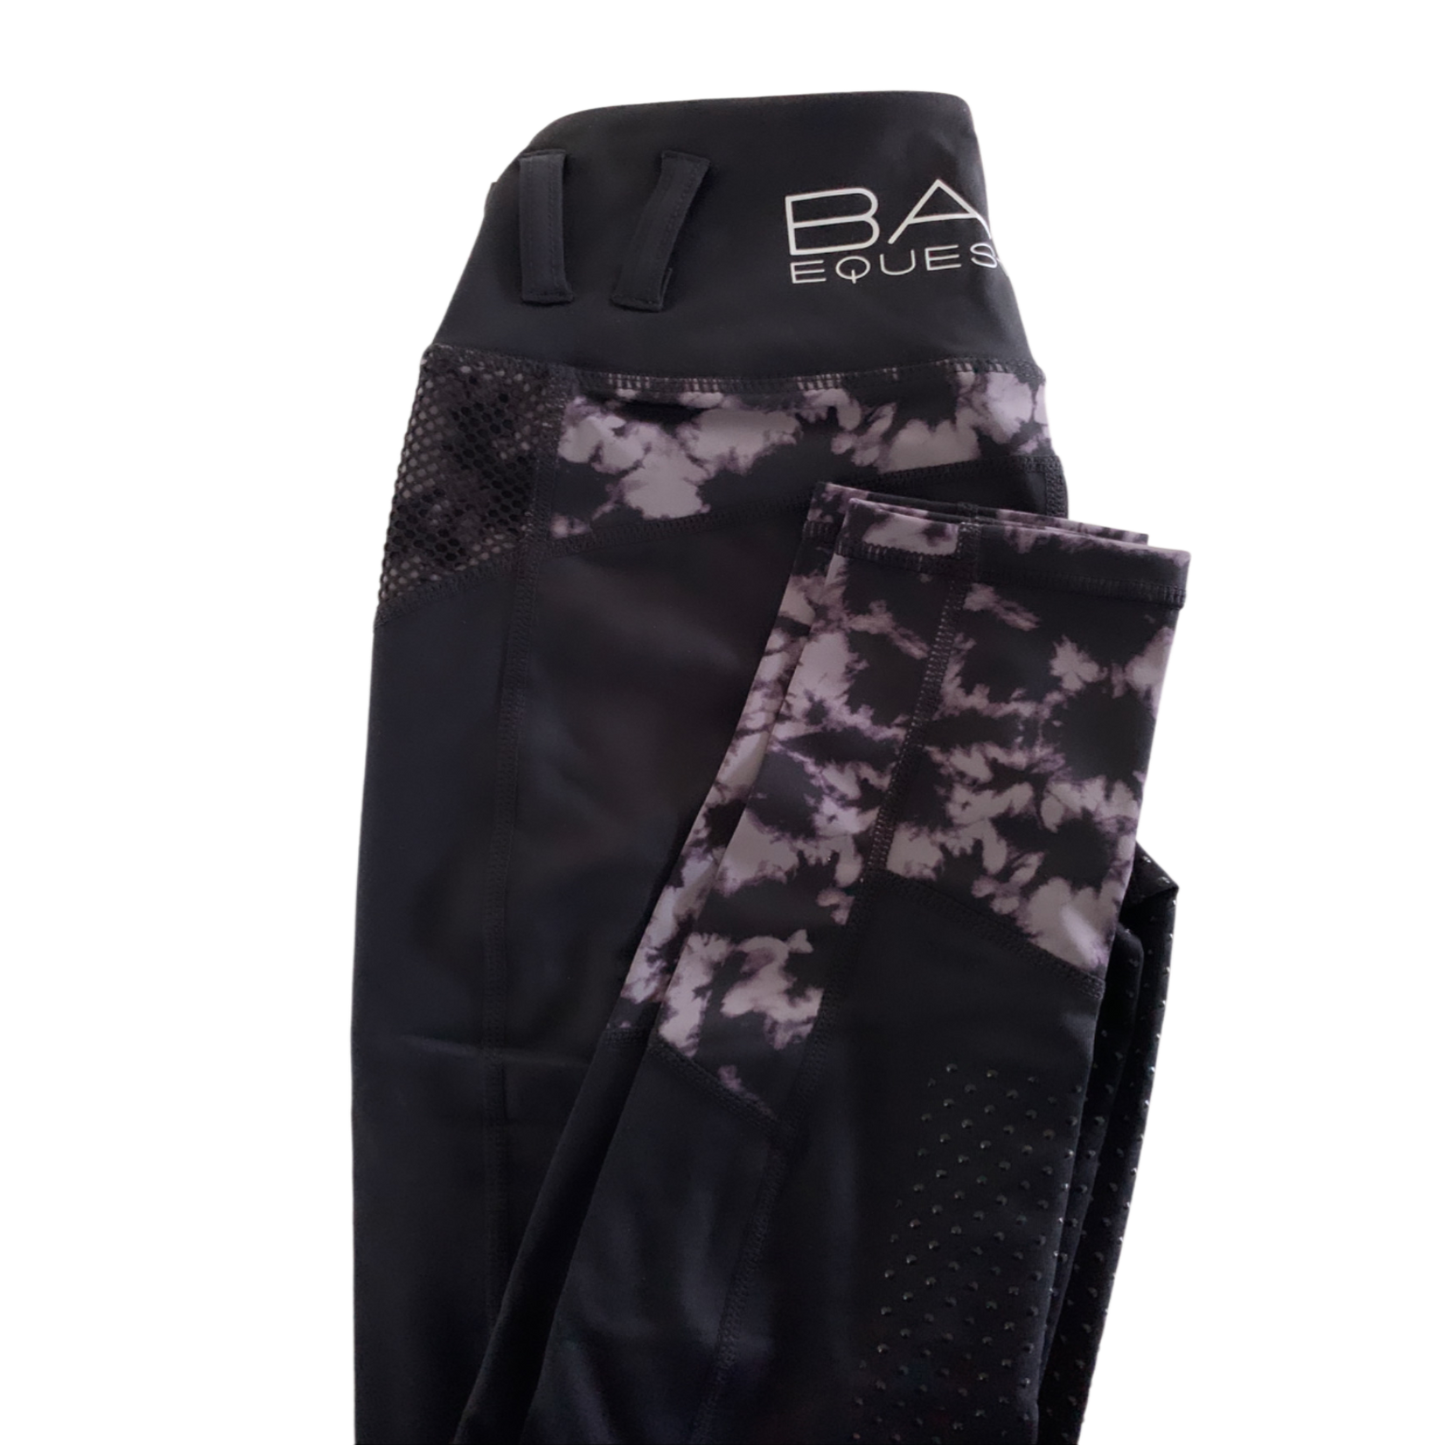 Black horse riding tights with mesh panels and camo accents.